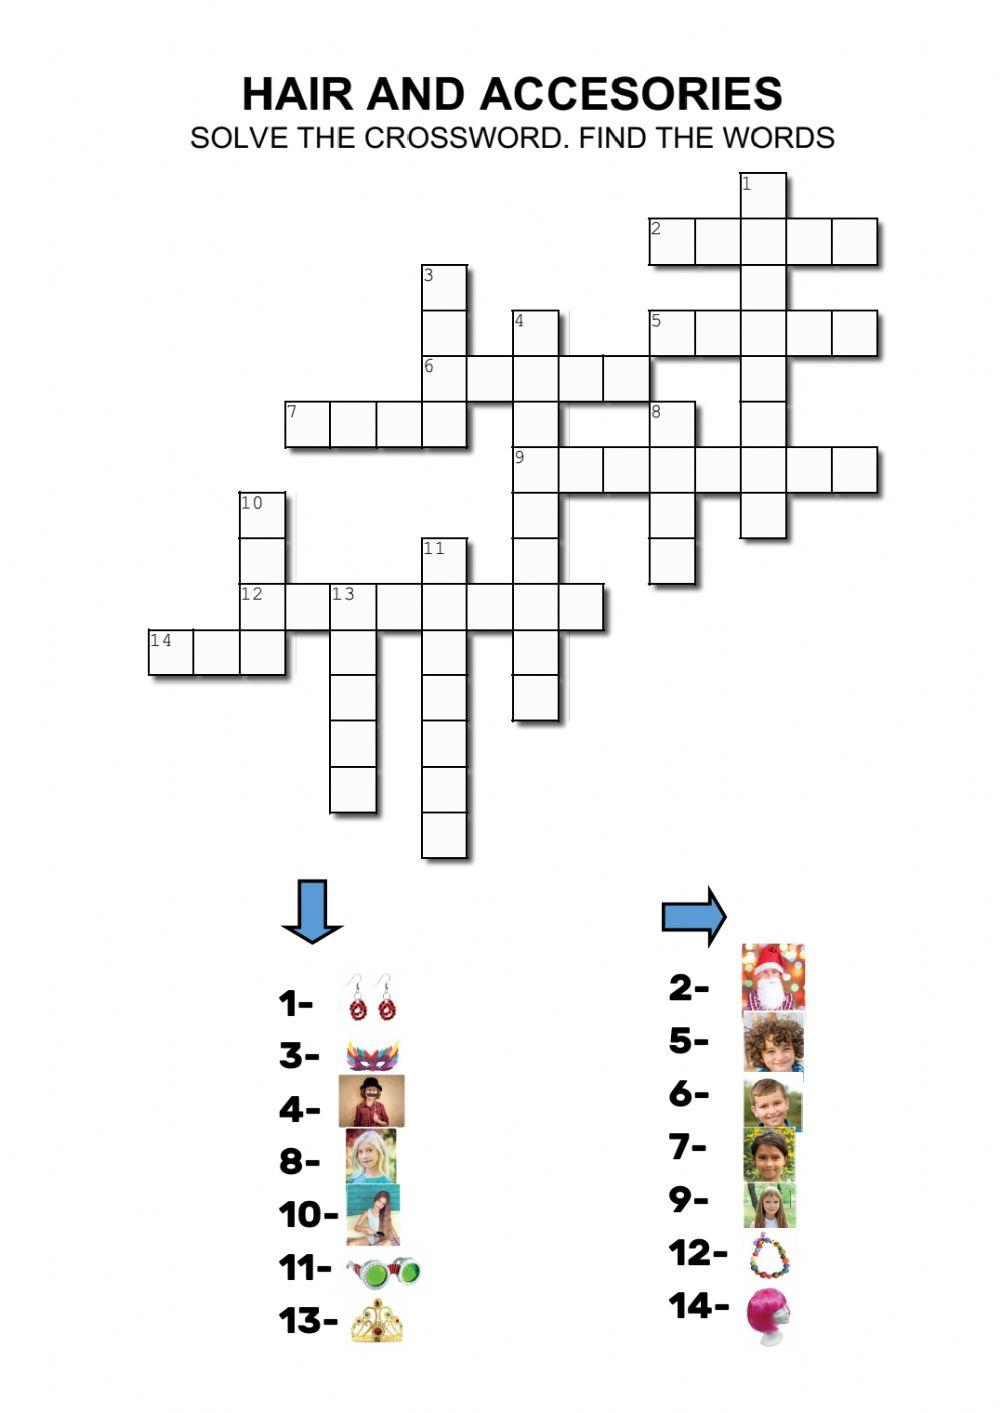 Hair and accesories crossword